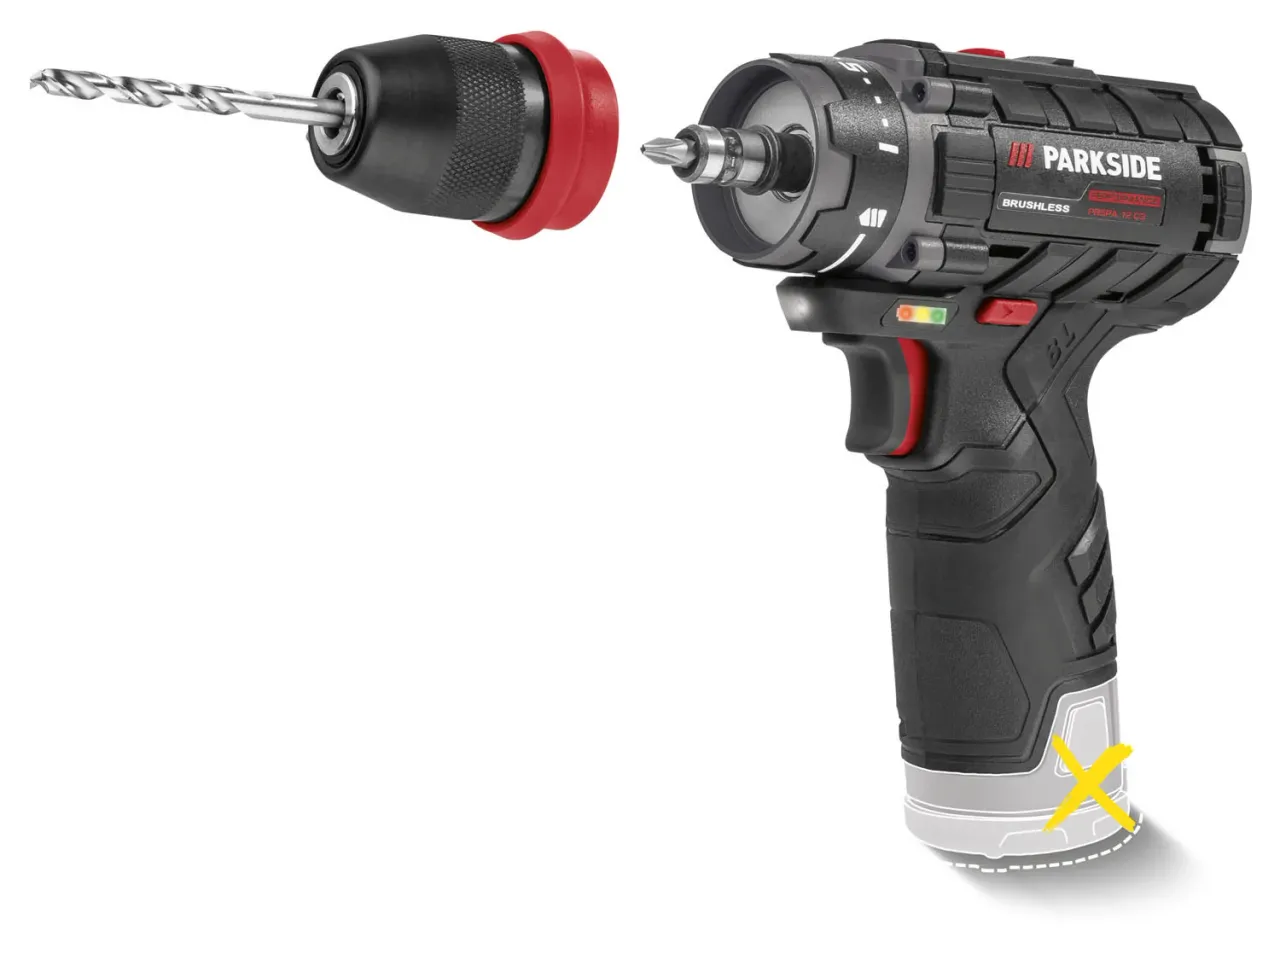 PARKSIDE PERFORMANCE cordless drill set »PBSPA 12 A1«, 12 V, with